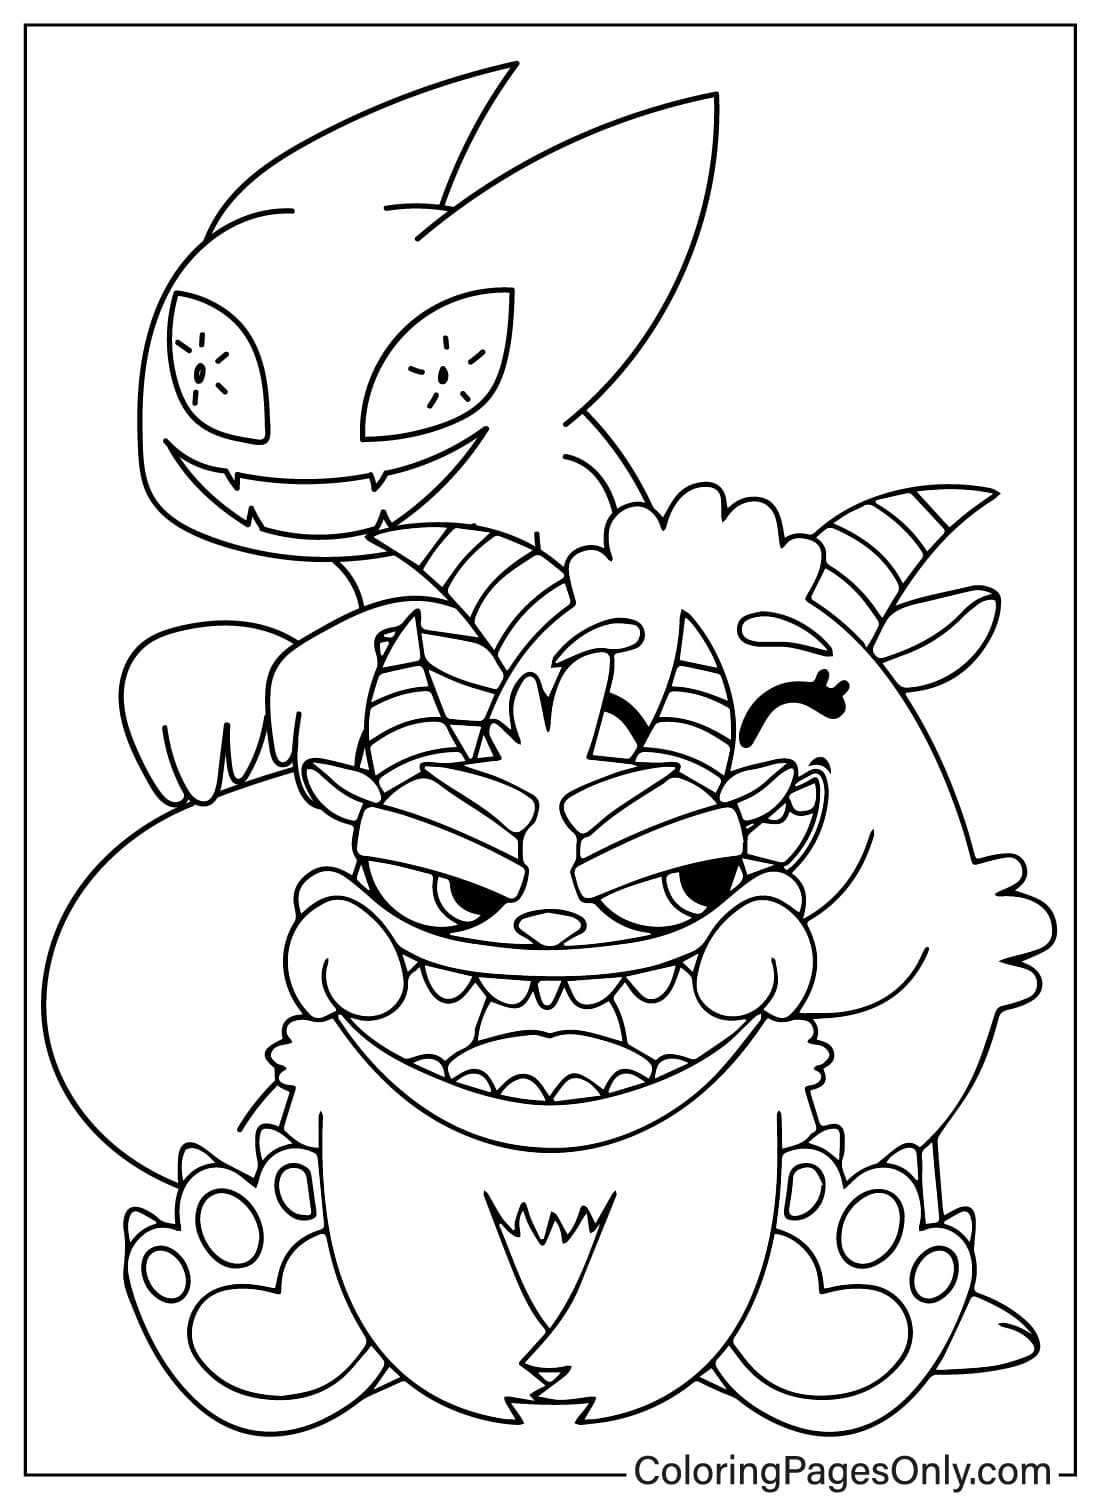 Ghazt Images Coloring Page - Free Printable Coloring Pages